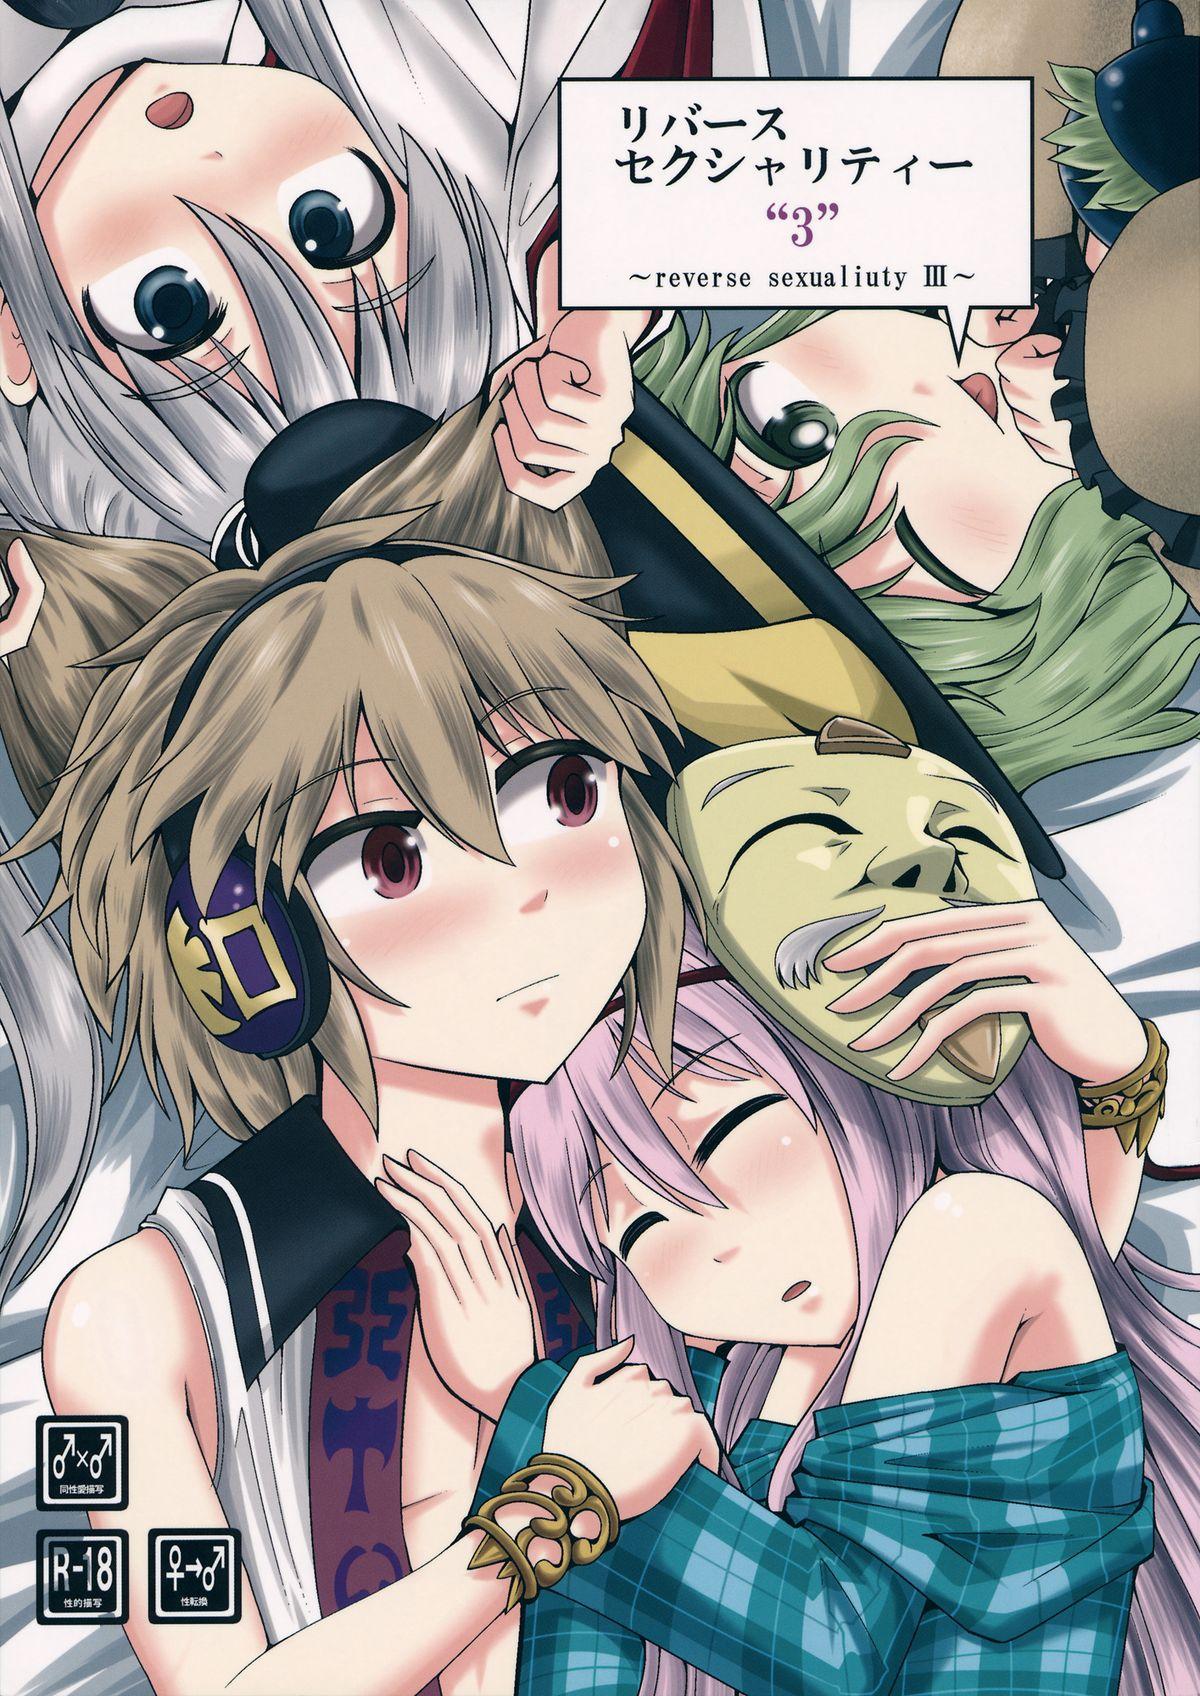 Sucking Reverse Sexuality 3 - Touhou project Sem Camisinha - Picture 1